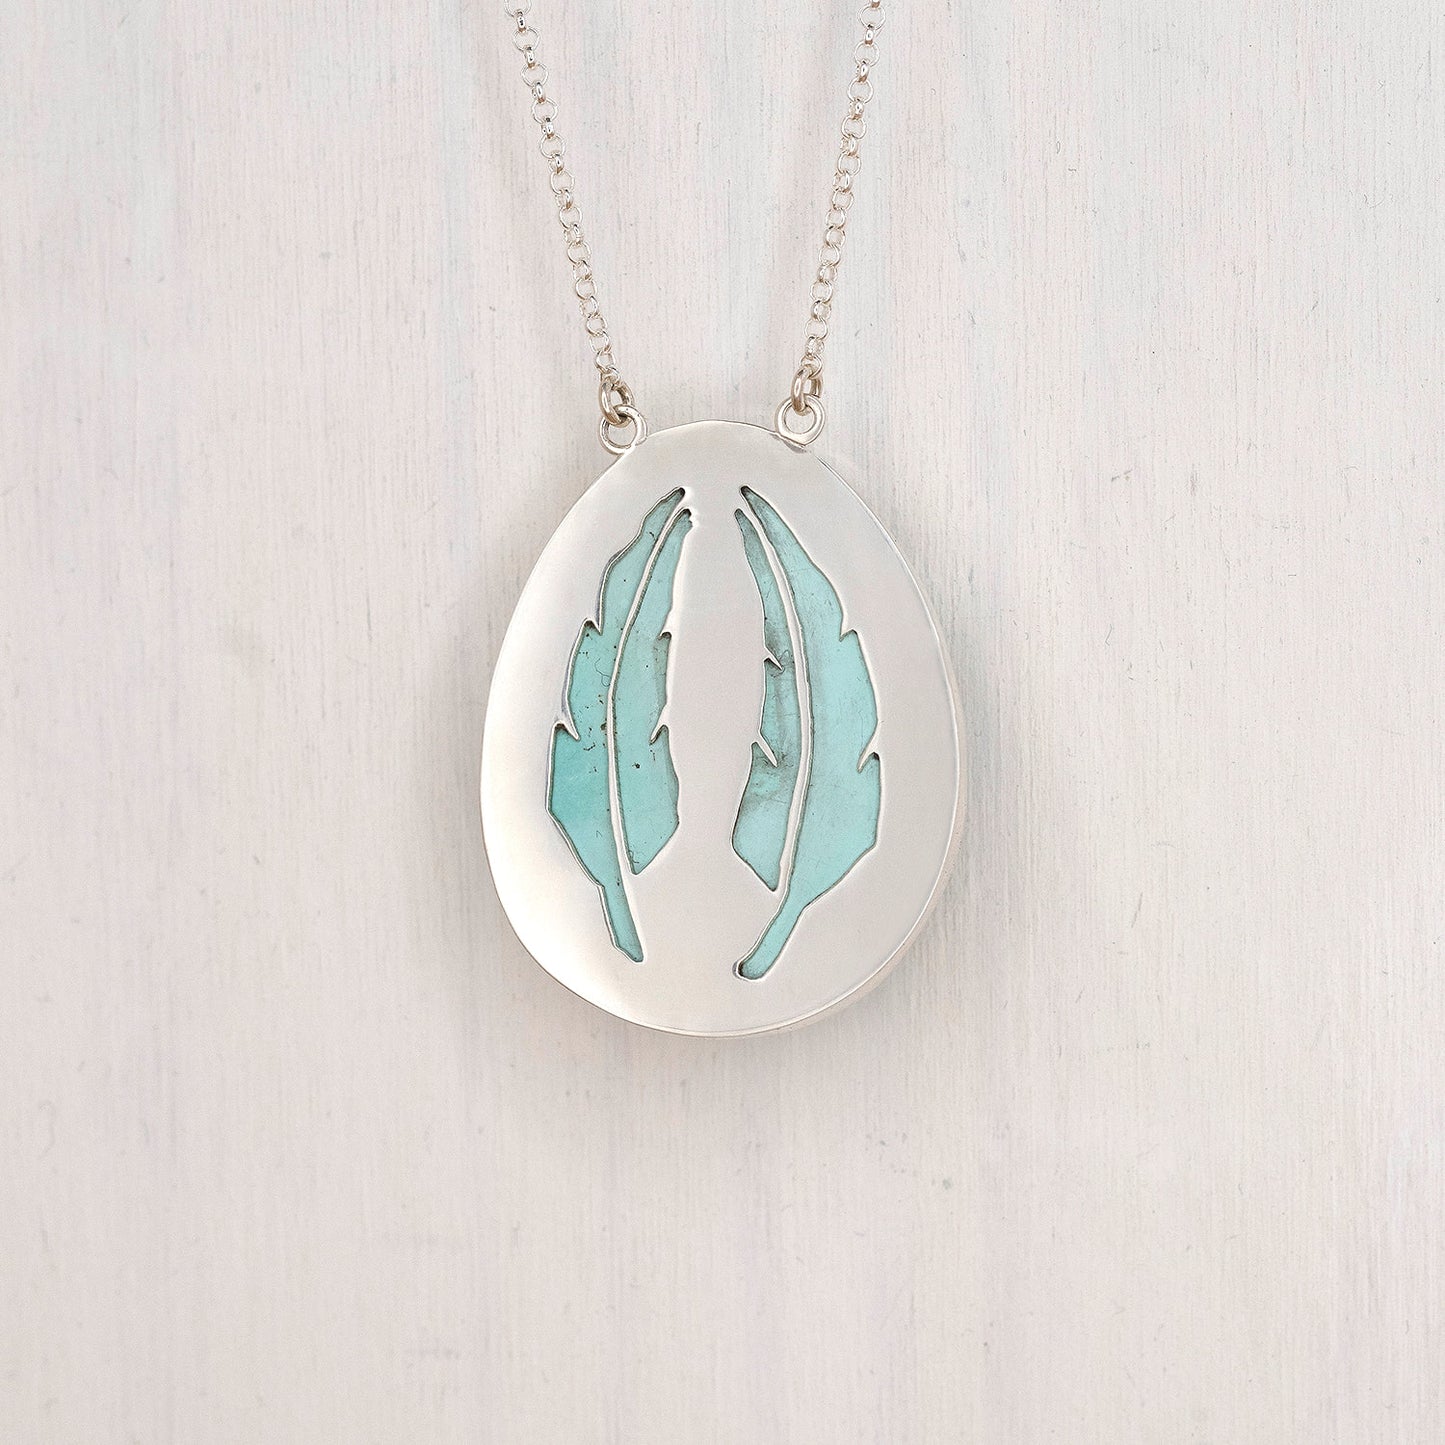 Teardrop Turquoise Pendant with Feathers